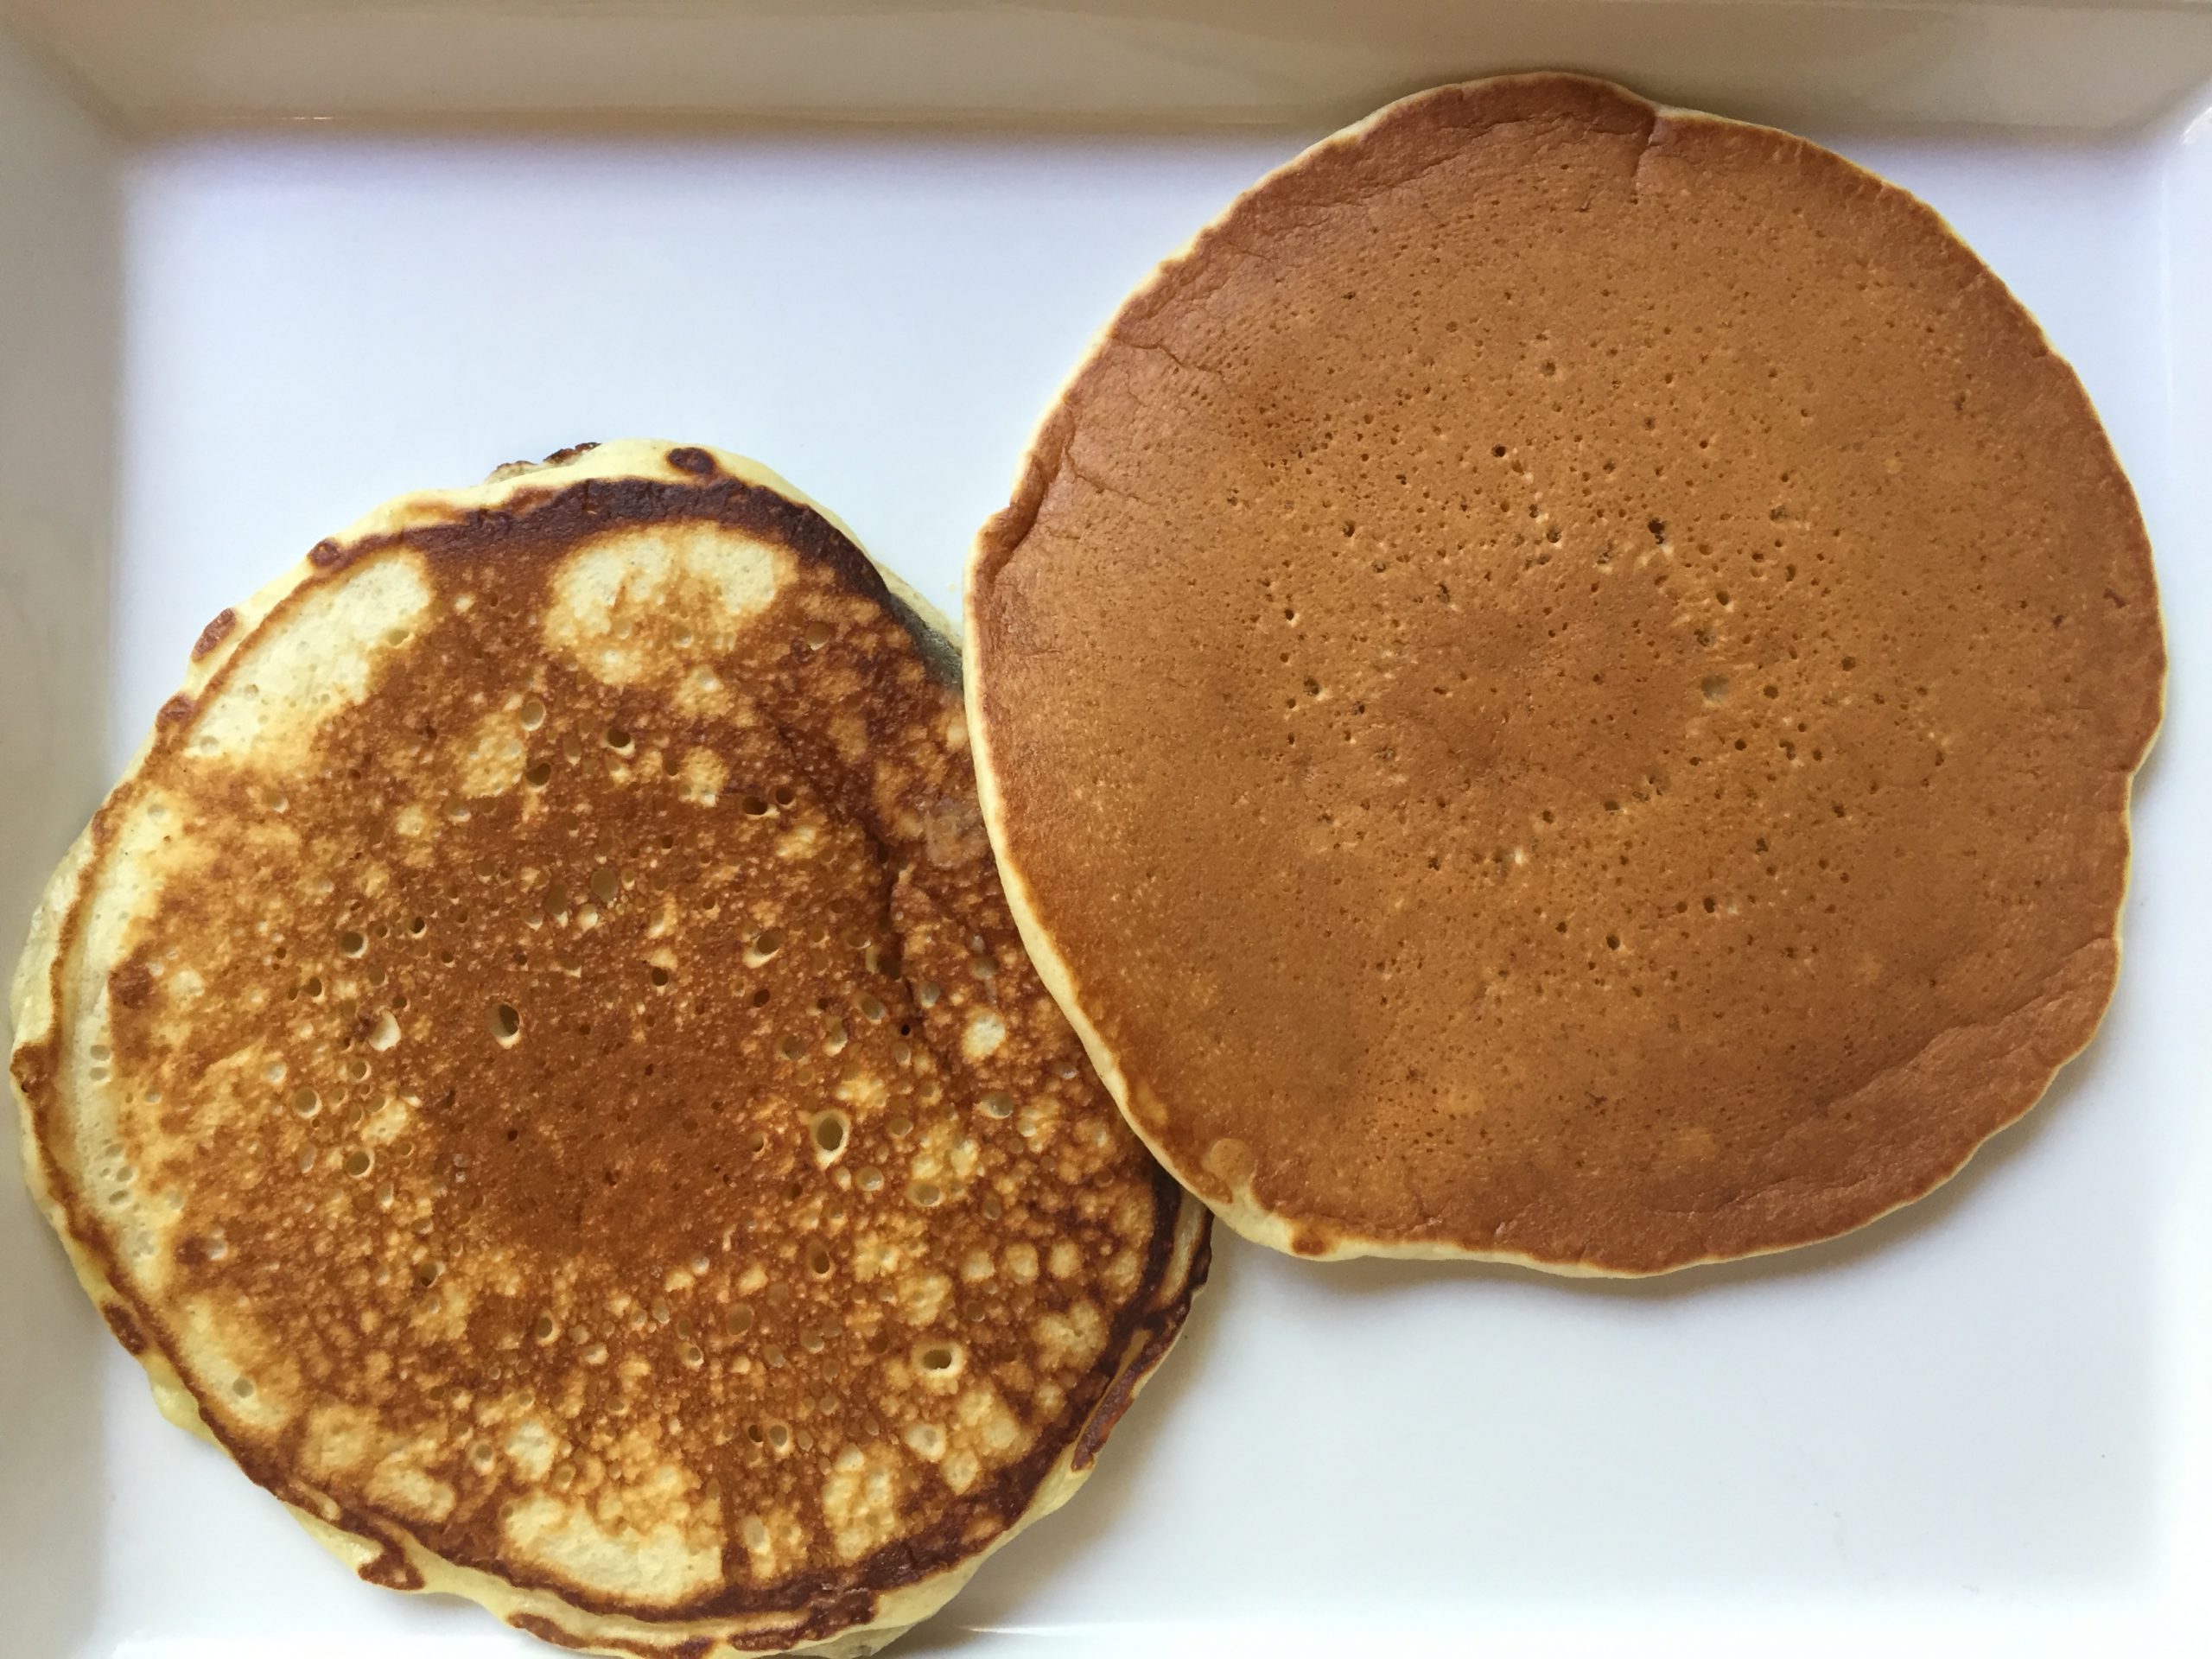 2 pancakes. 1 cooked with a lot of butter and 1 cooked without too much butter.